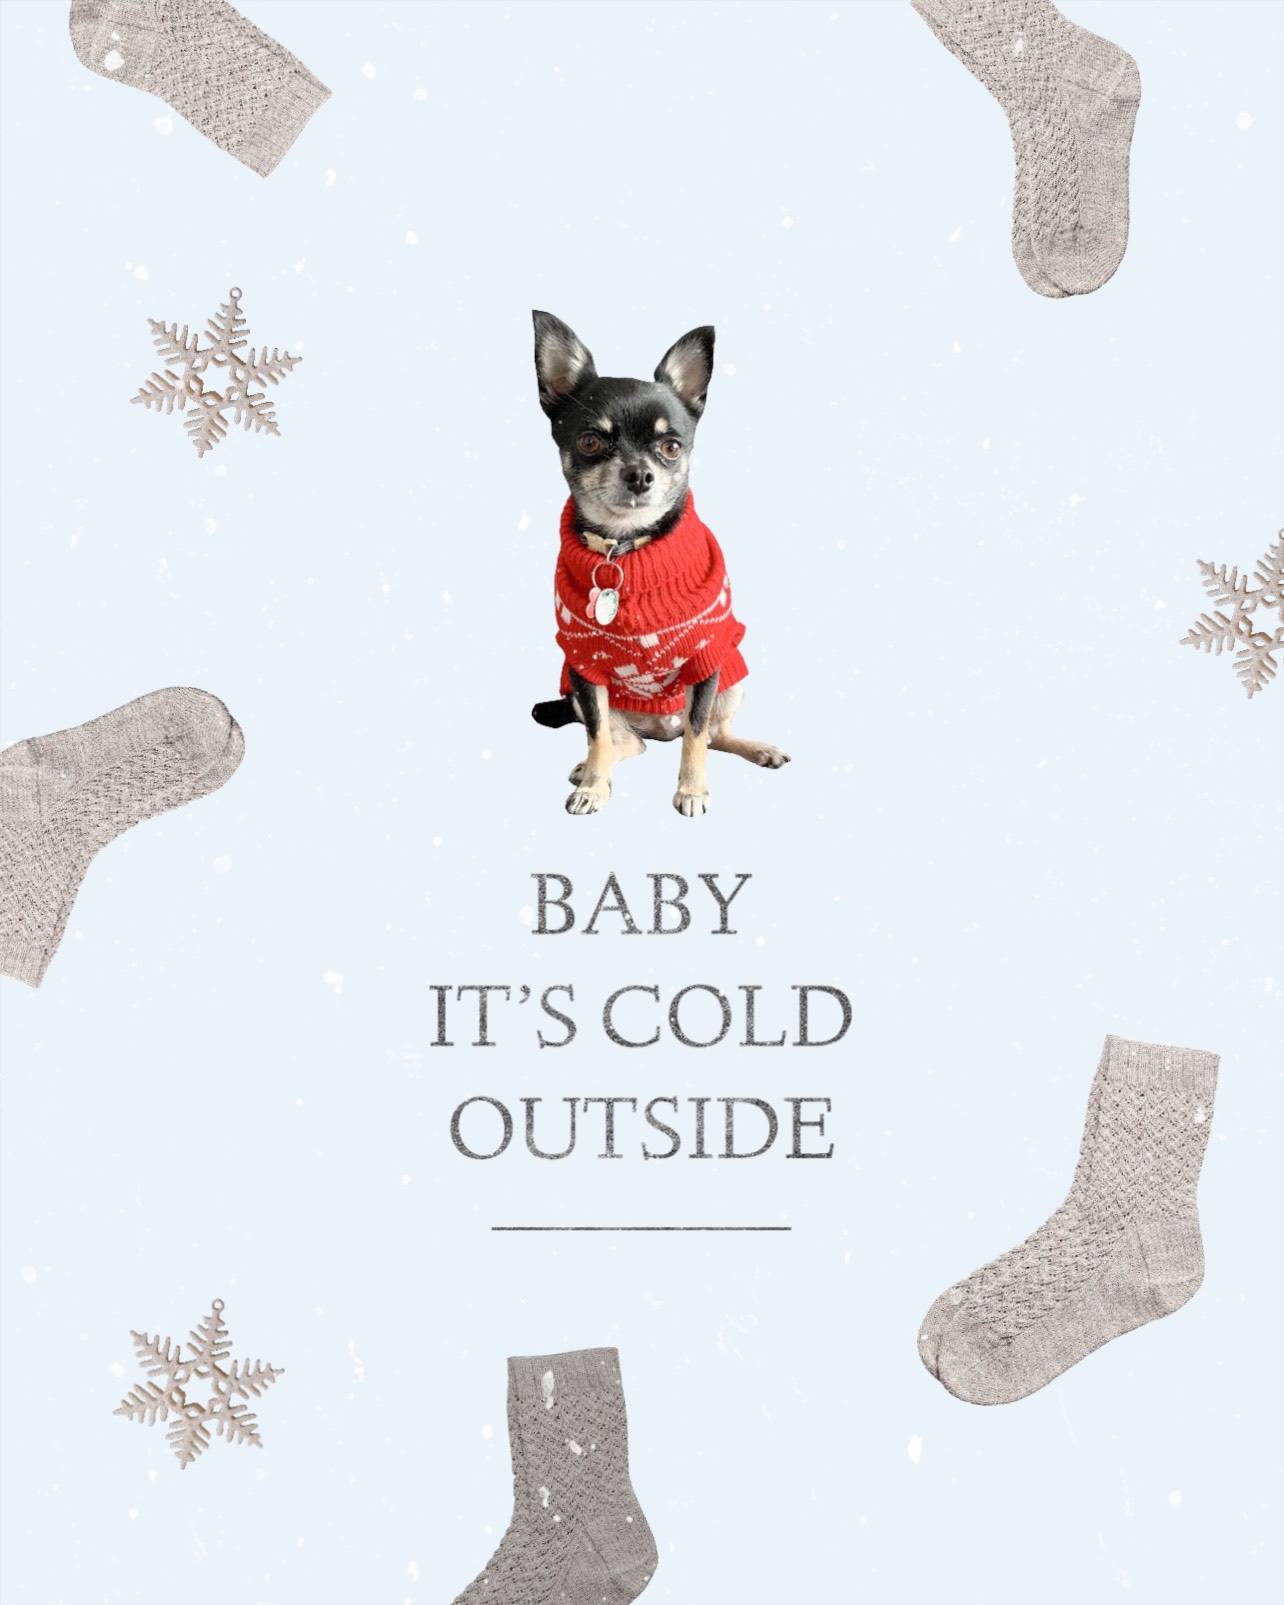 A Small Dog Wearing A Red Sweater And Socks Winter Wonderland Template